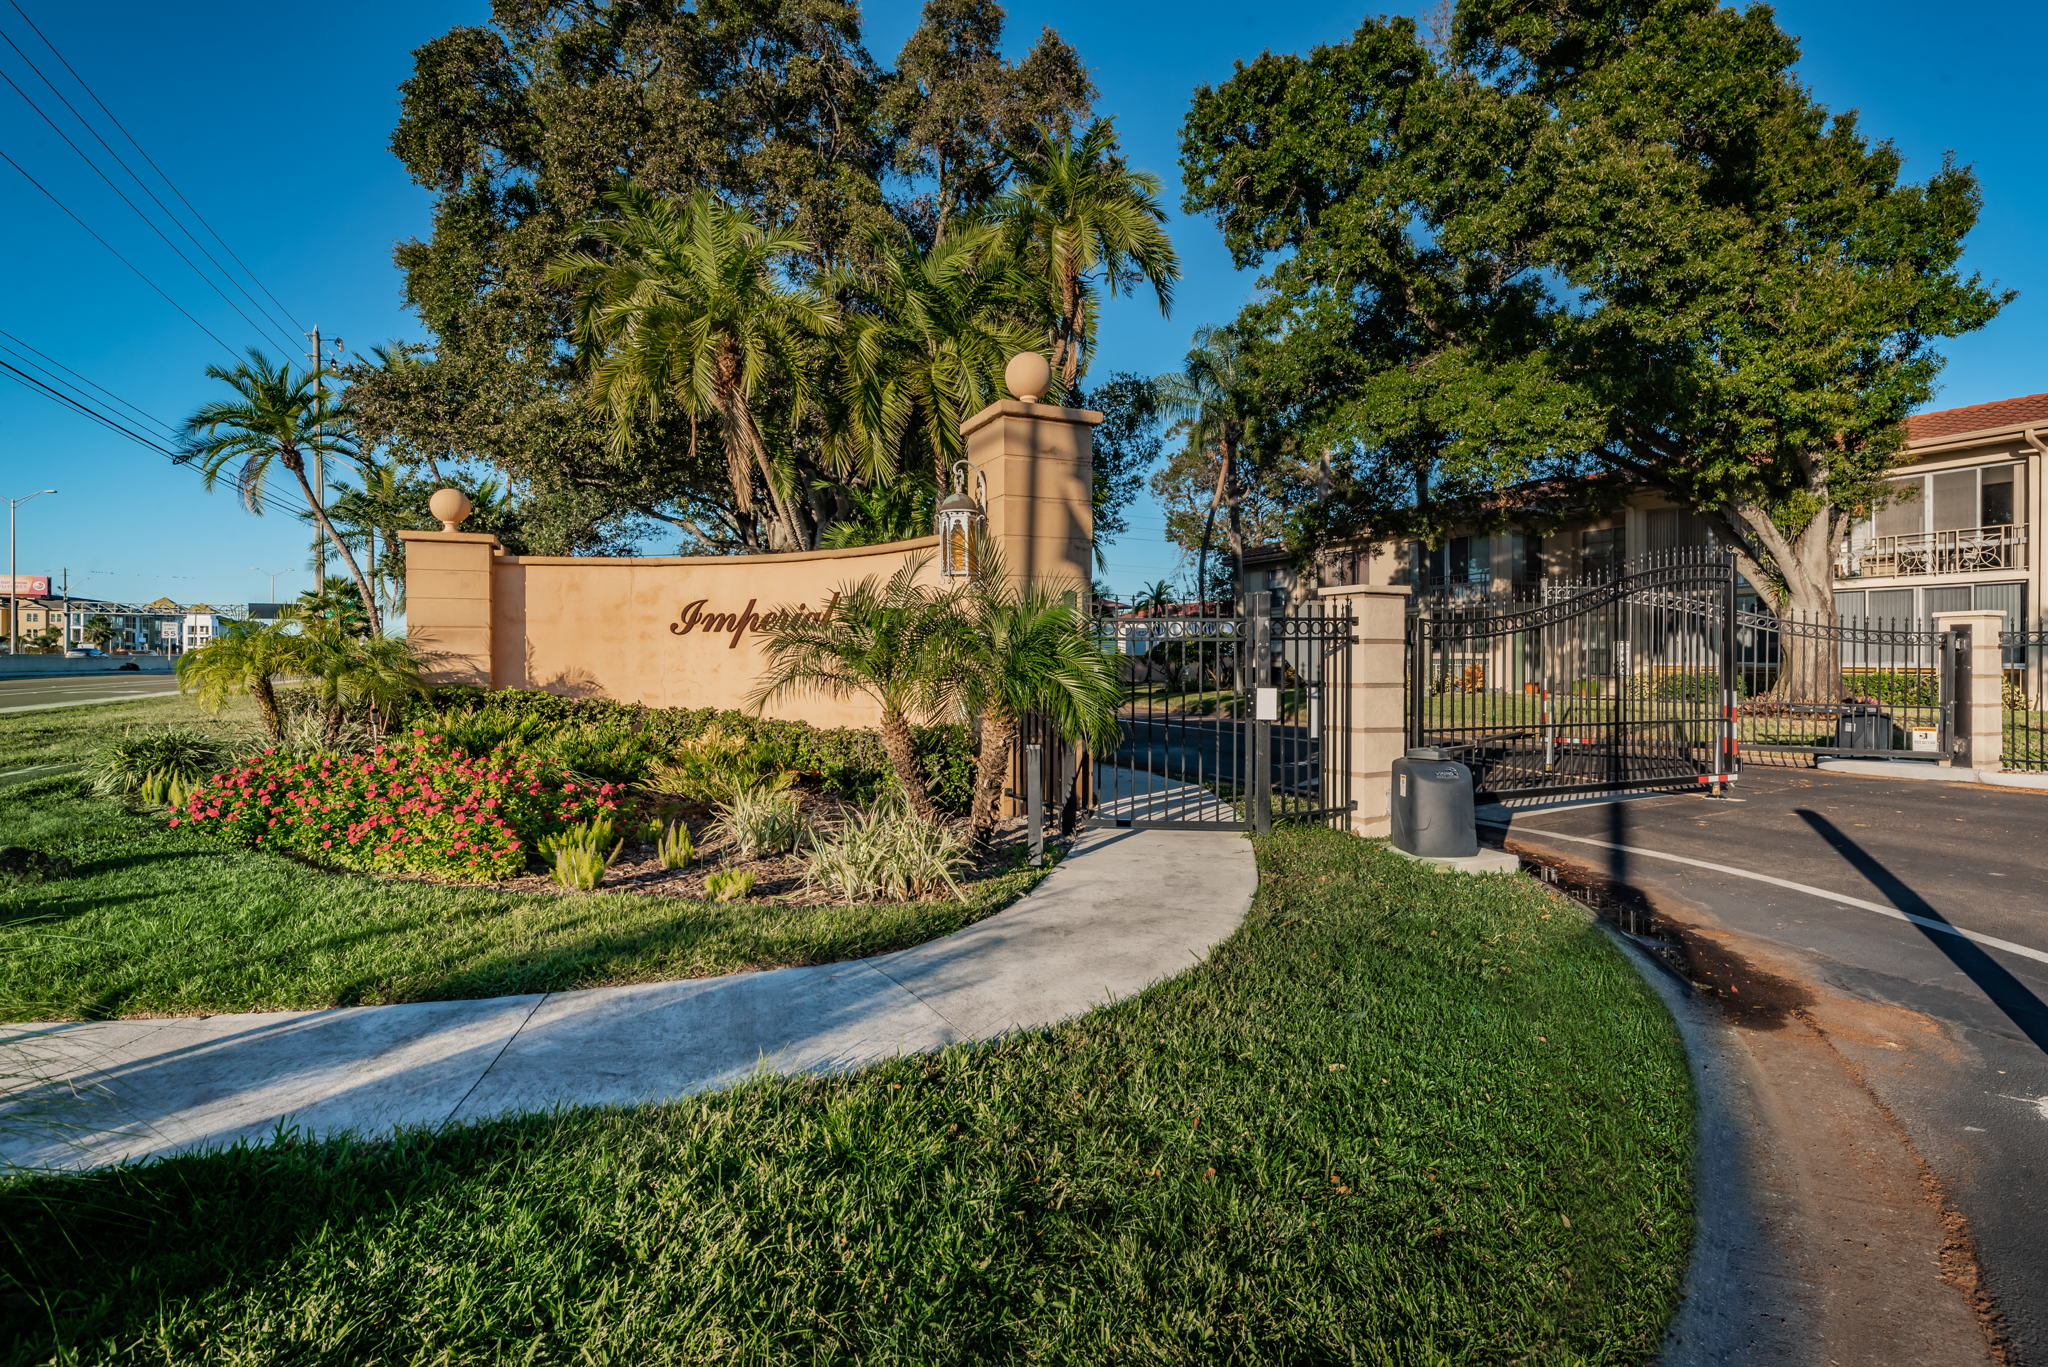 6-Gated Entry